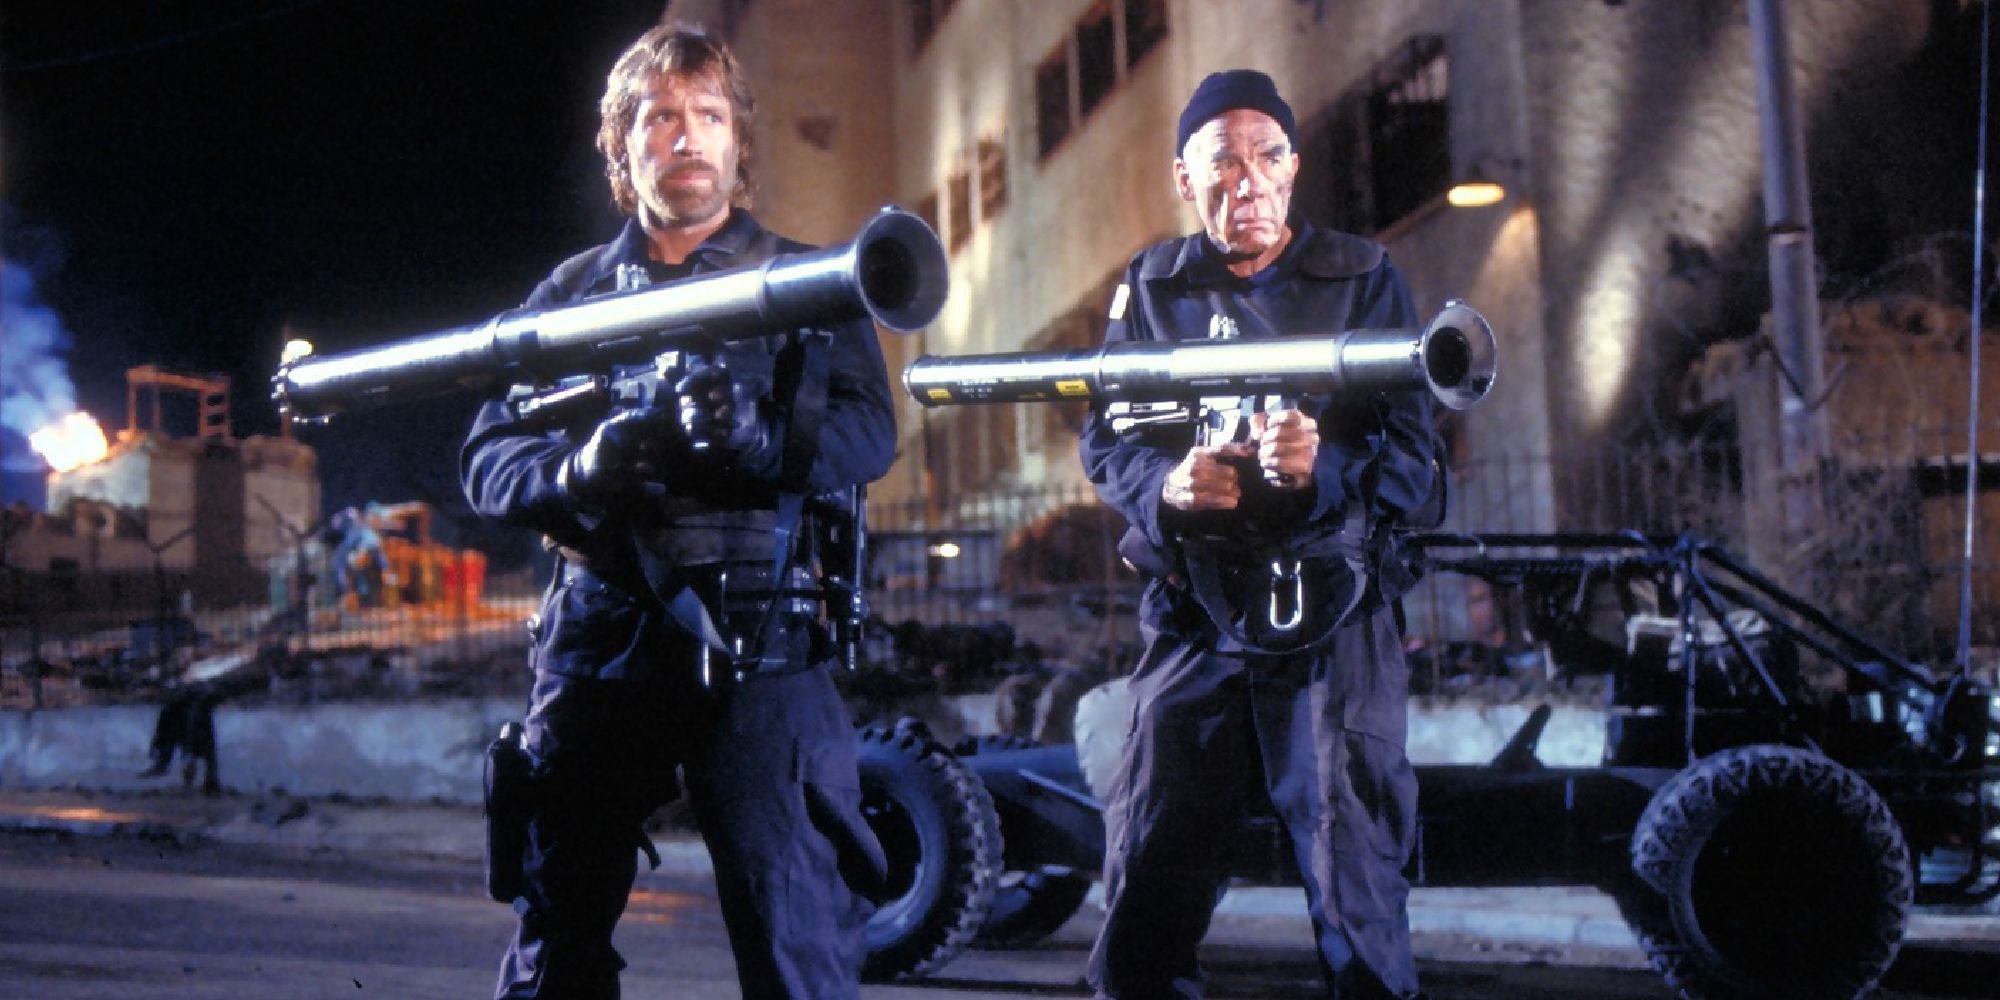 The Delta Force - 1986